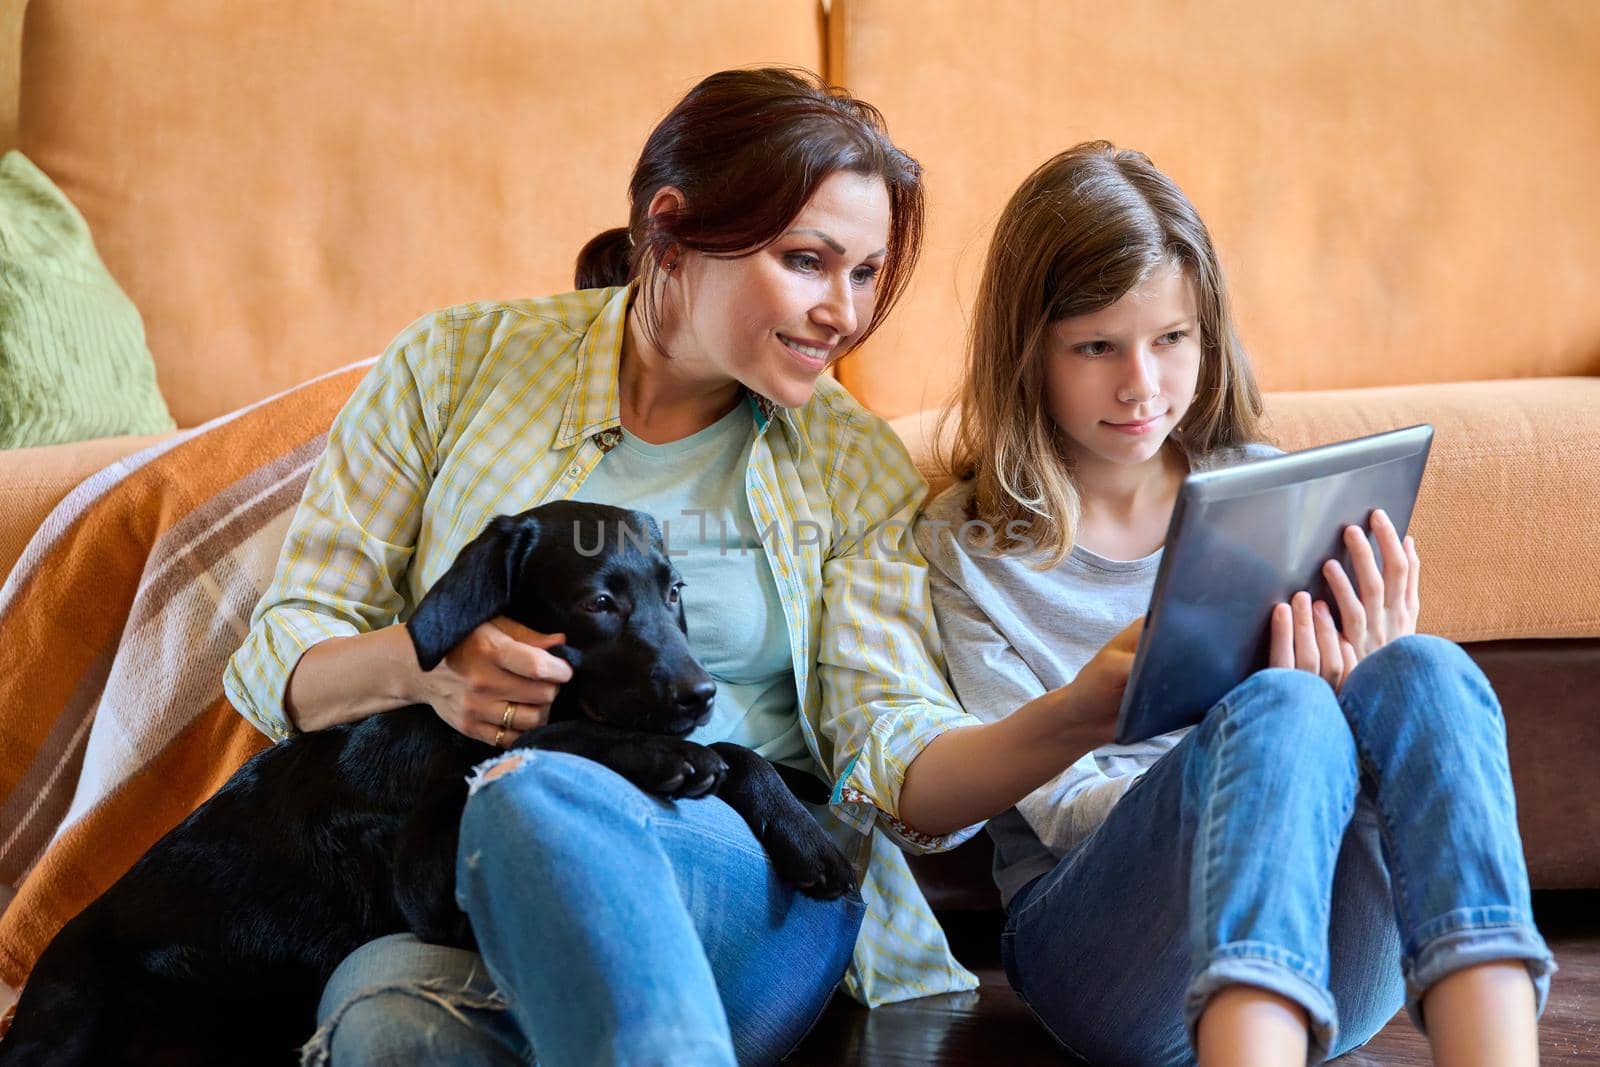 Family, lifestyle, communication, happiness, vacation together, pets, home concept. Mother daughter child and labrador puppy dog sitting together near sofa looking into digital tablet screen at home